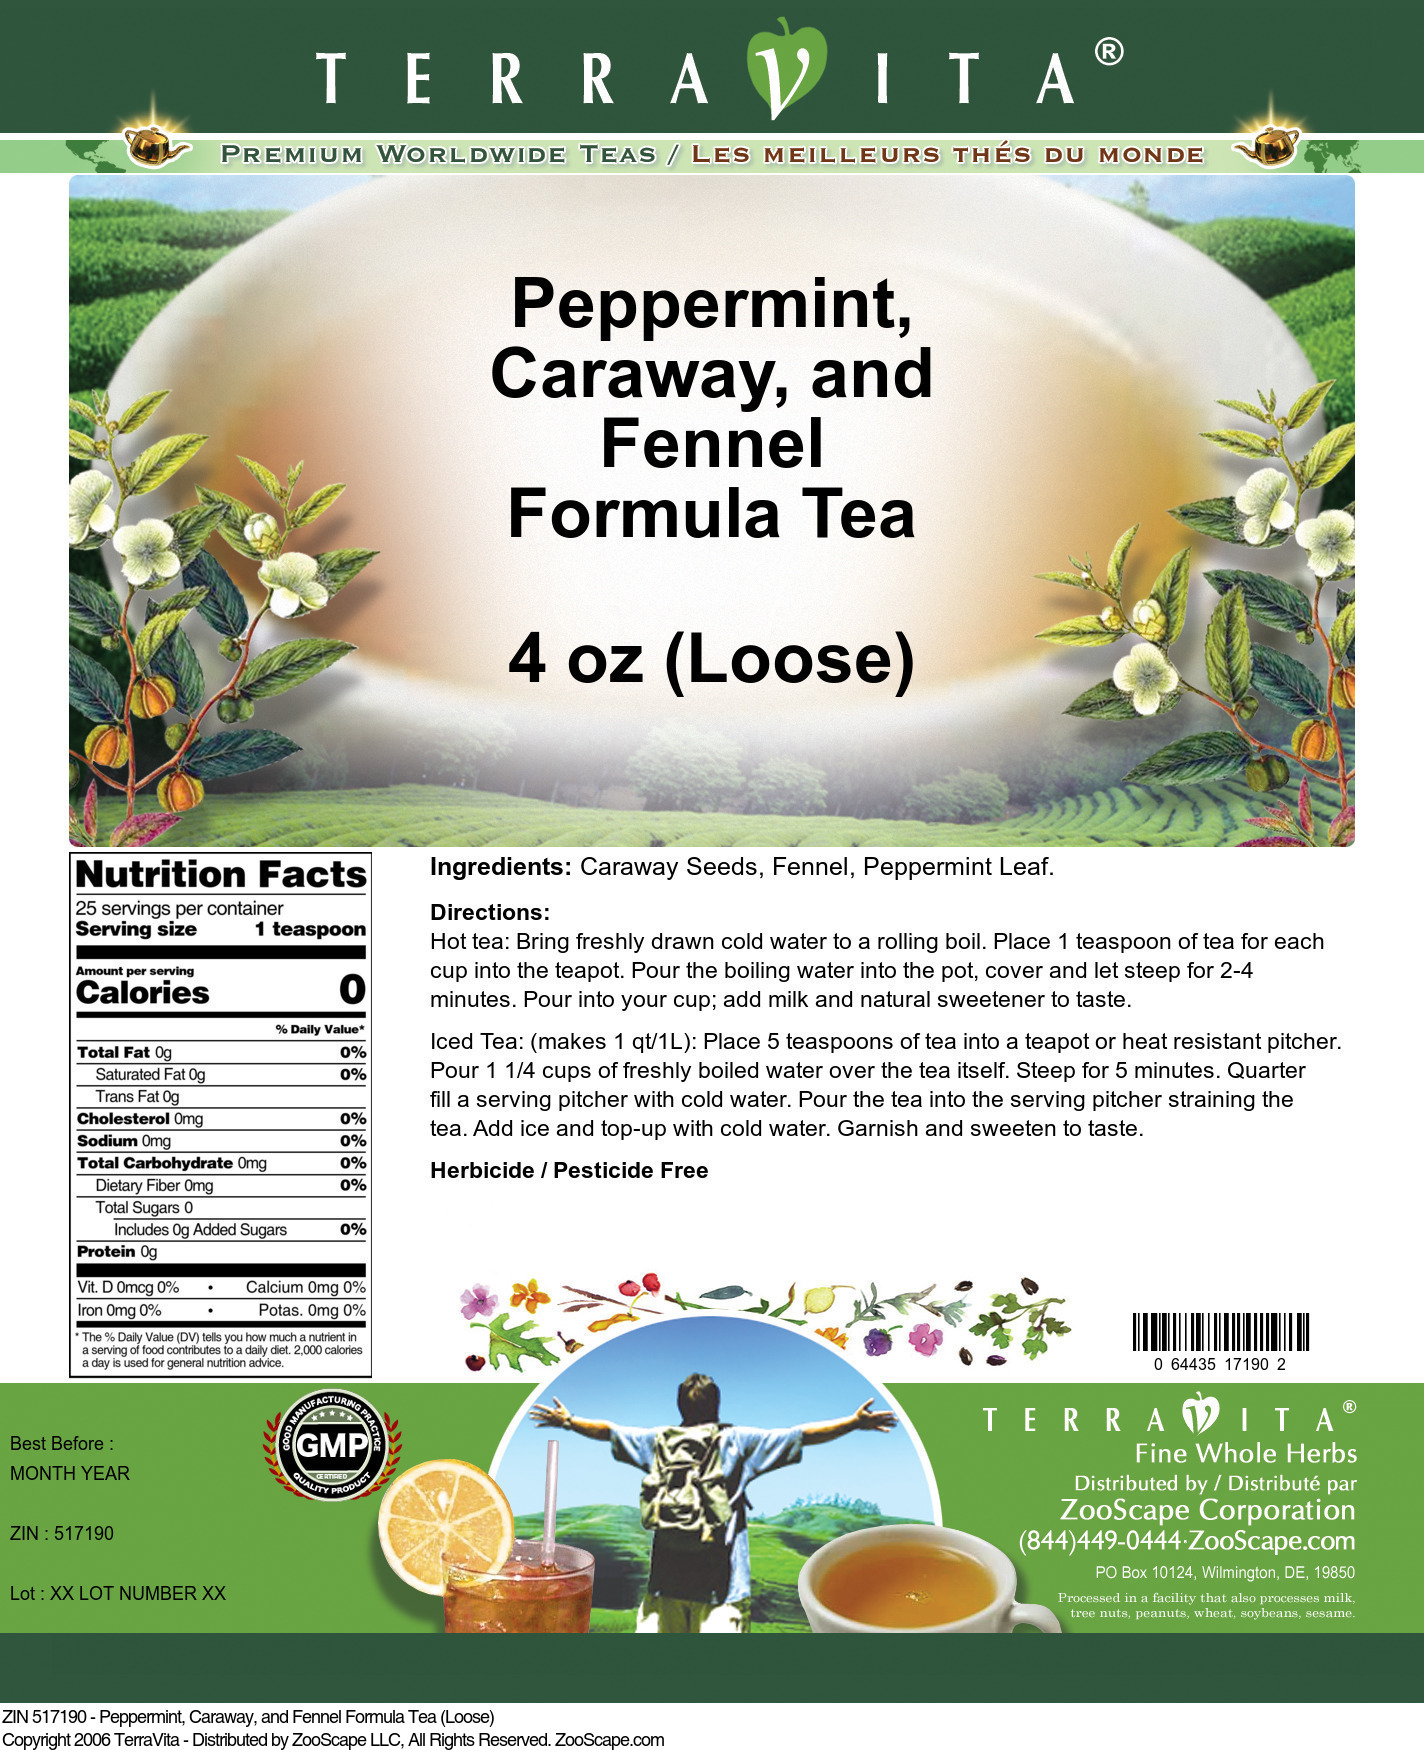 Peppermint, Caraway, and Fennel Formula Tea (Loose) - Label